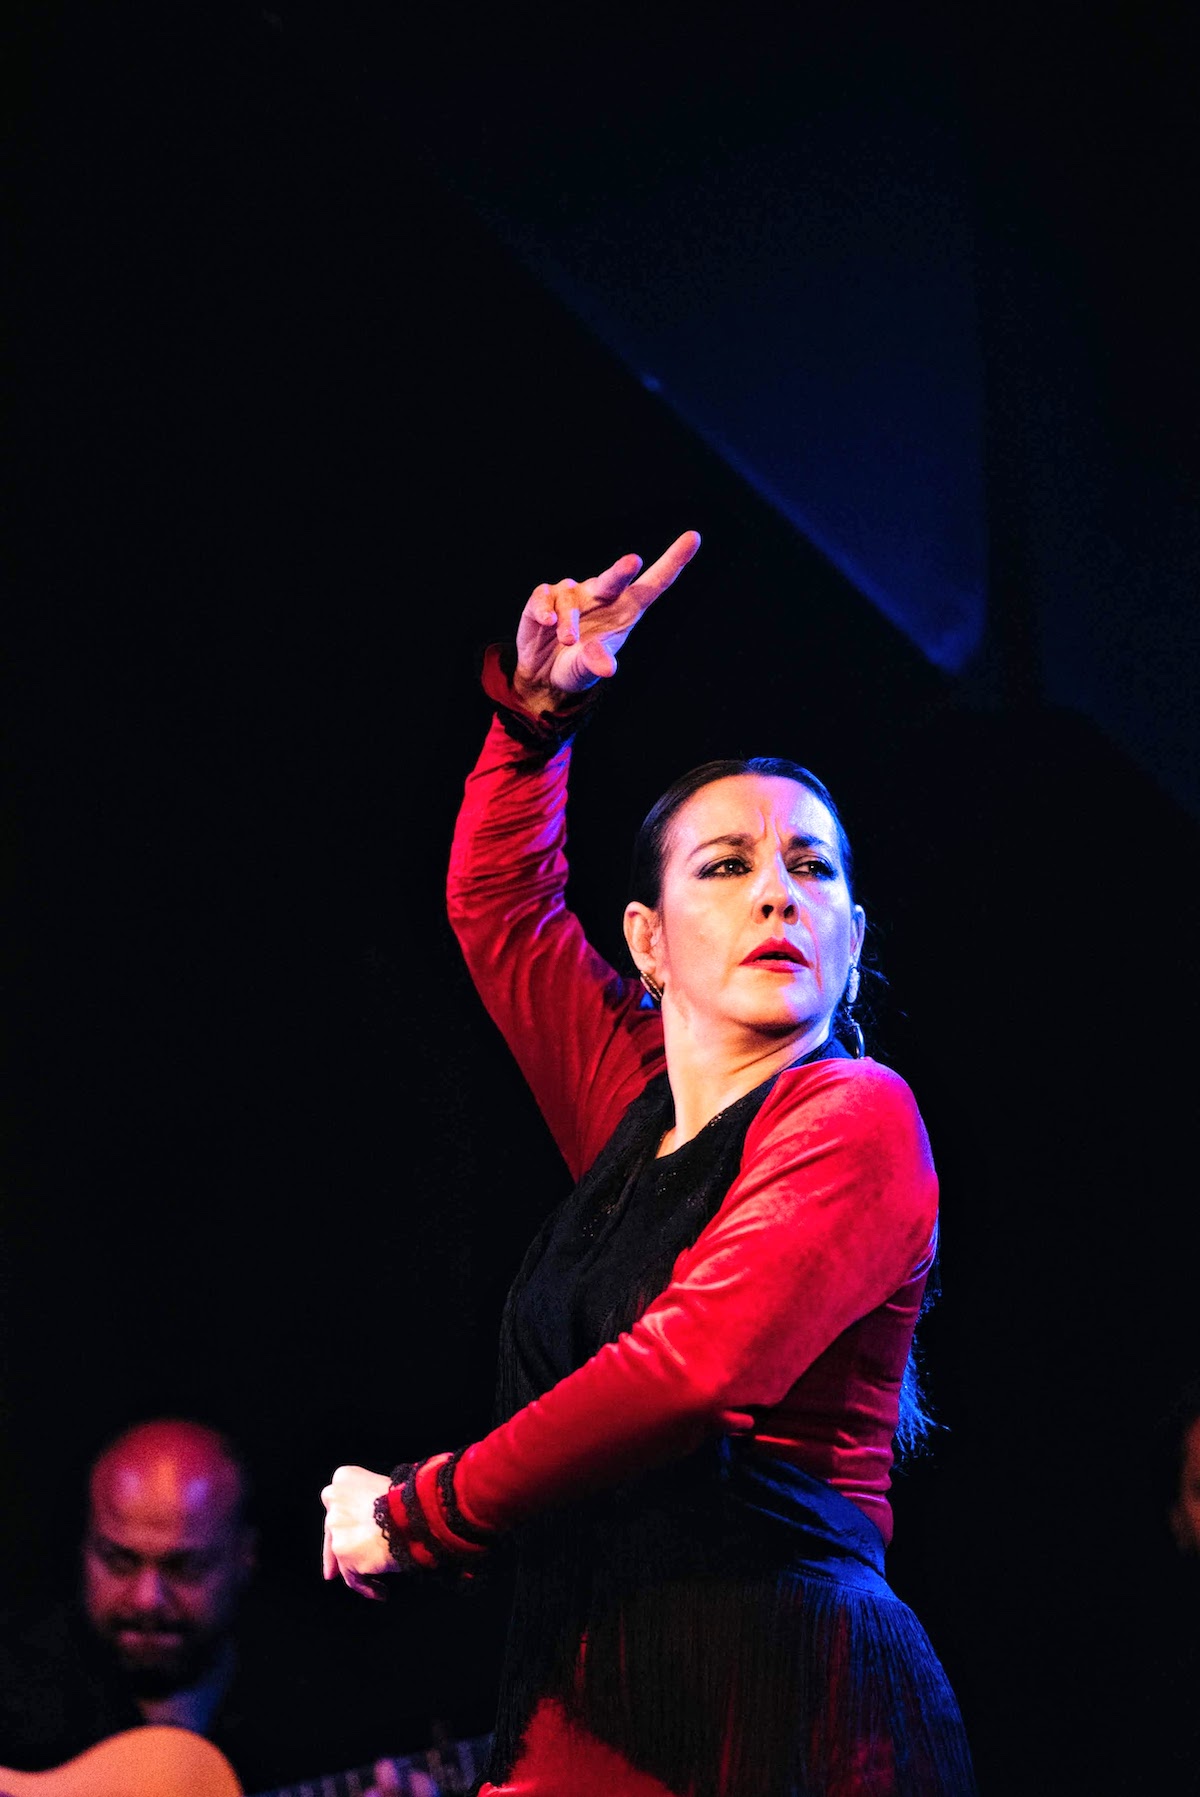 Flamenco dancer in a red dress performing.